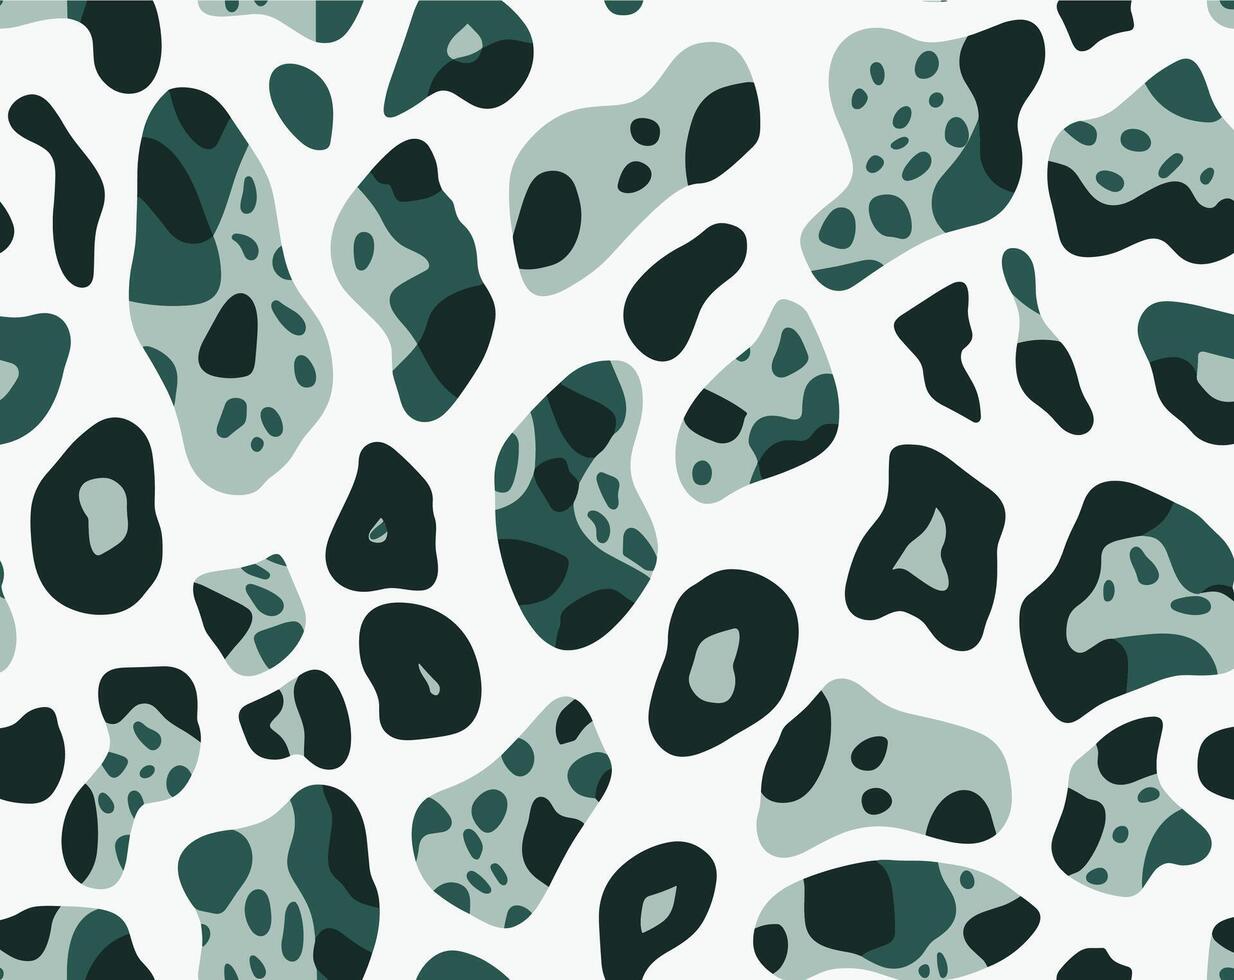 Green and Gray Leopard Print Pattern on White Background, Letterboxing, Organic Shapes, Light Teal and Dark White, Multi-Coloured Minimalism vector